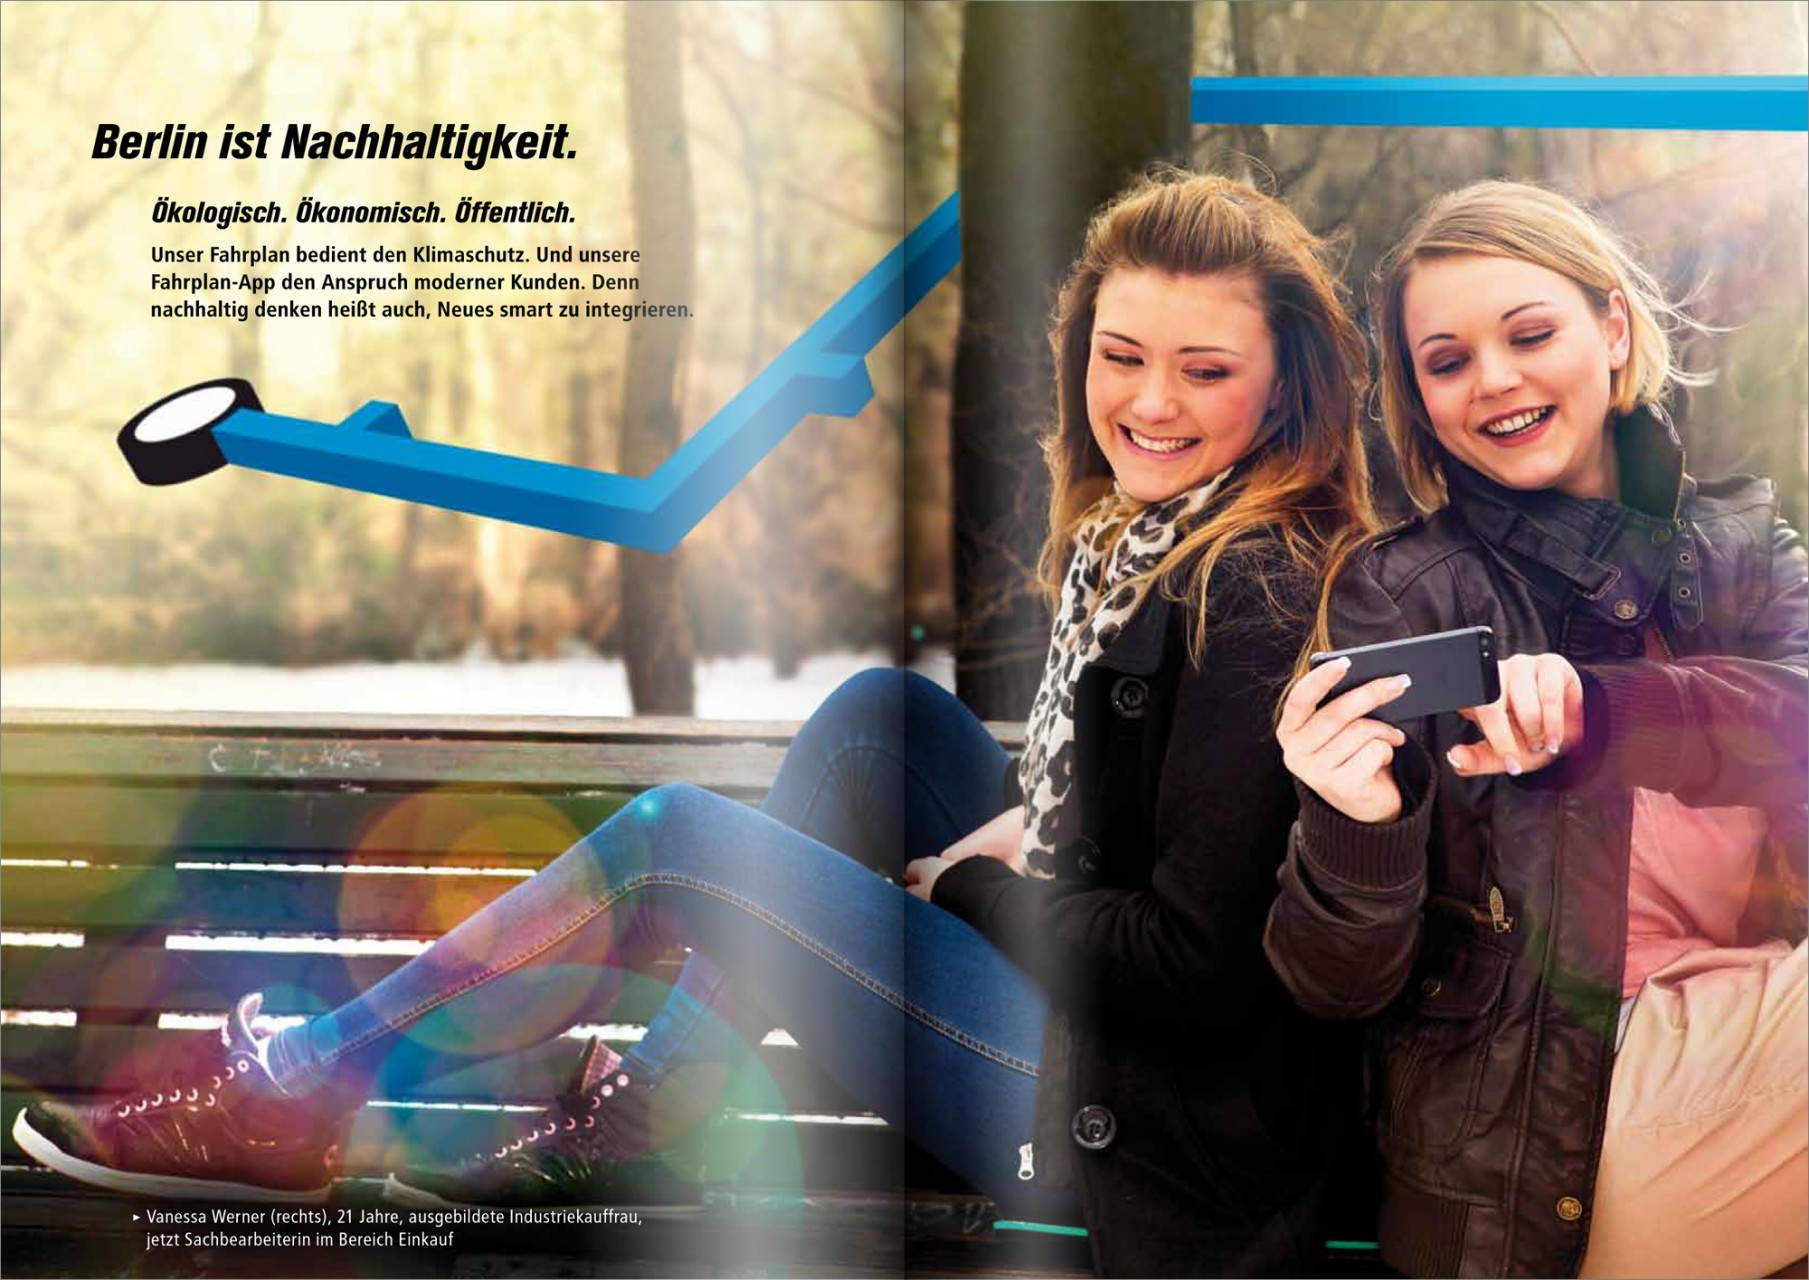 BVG Annual Report